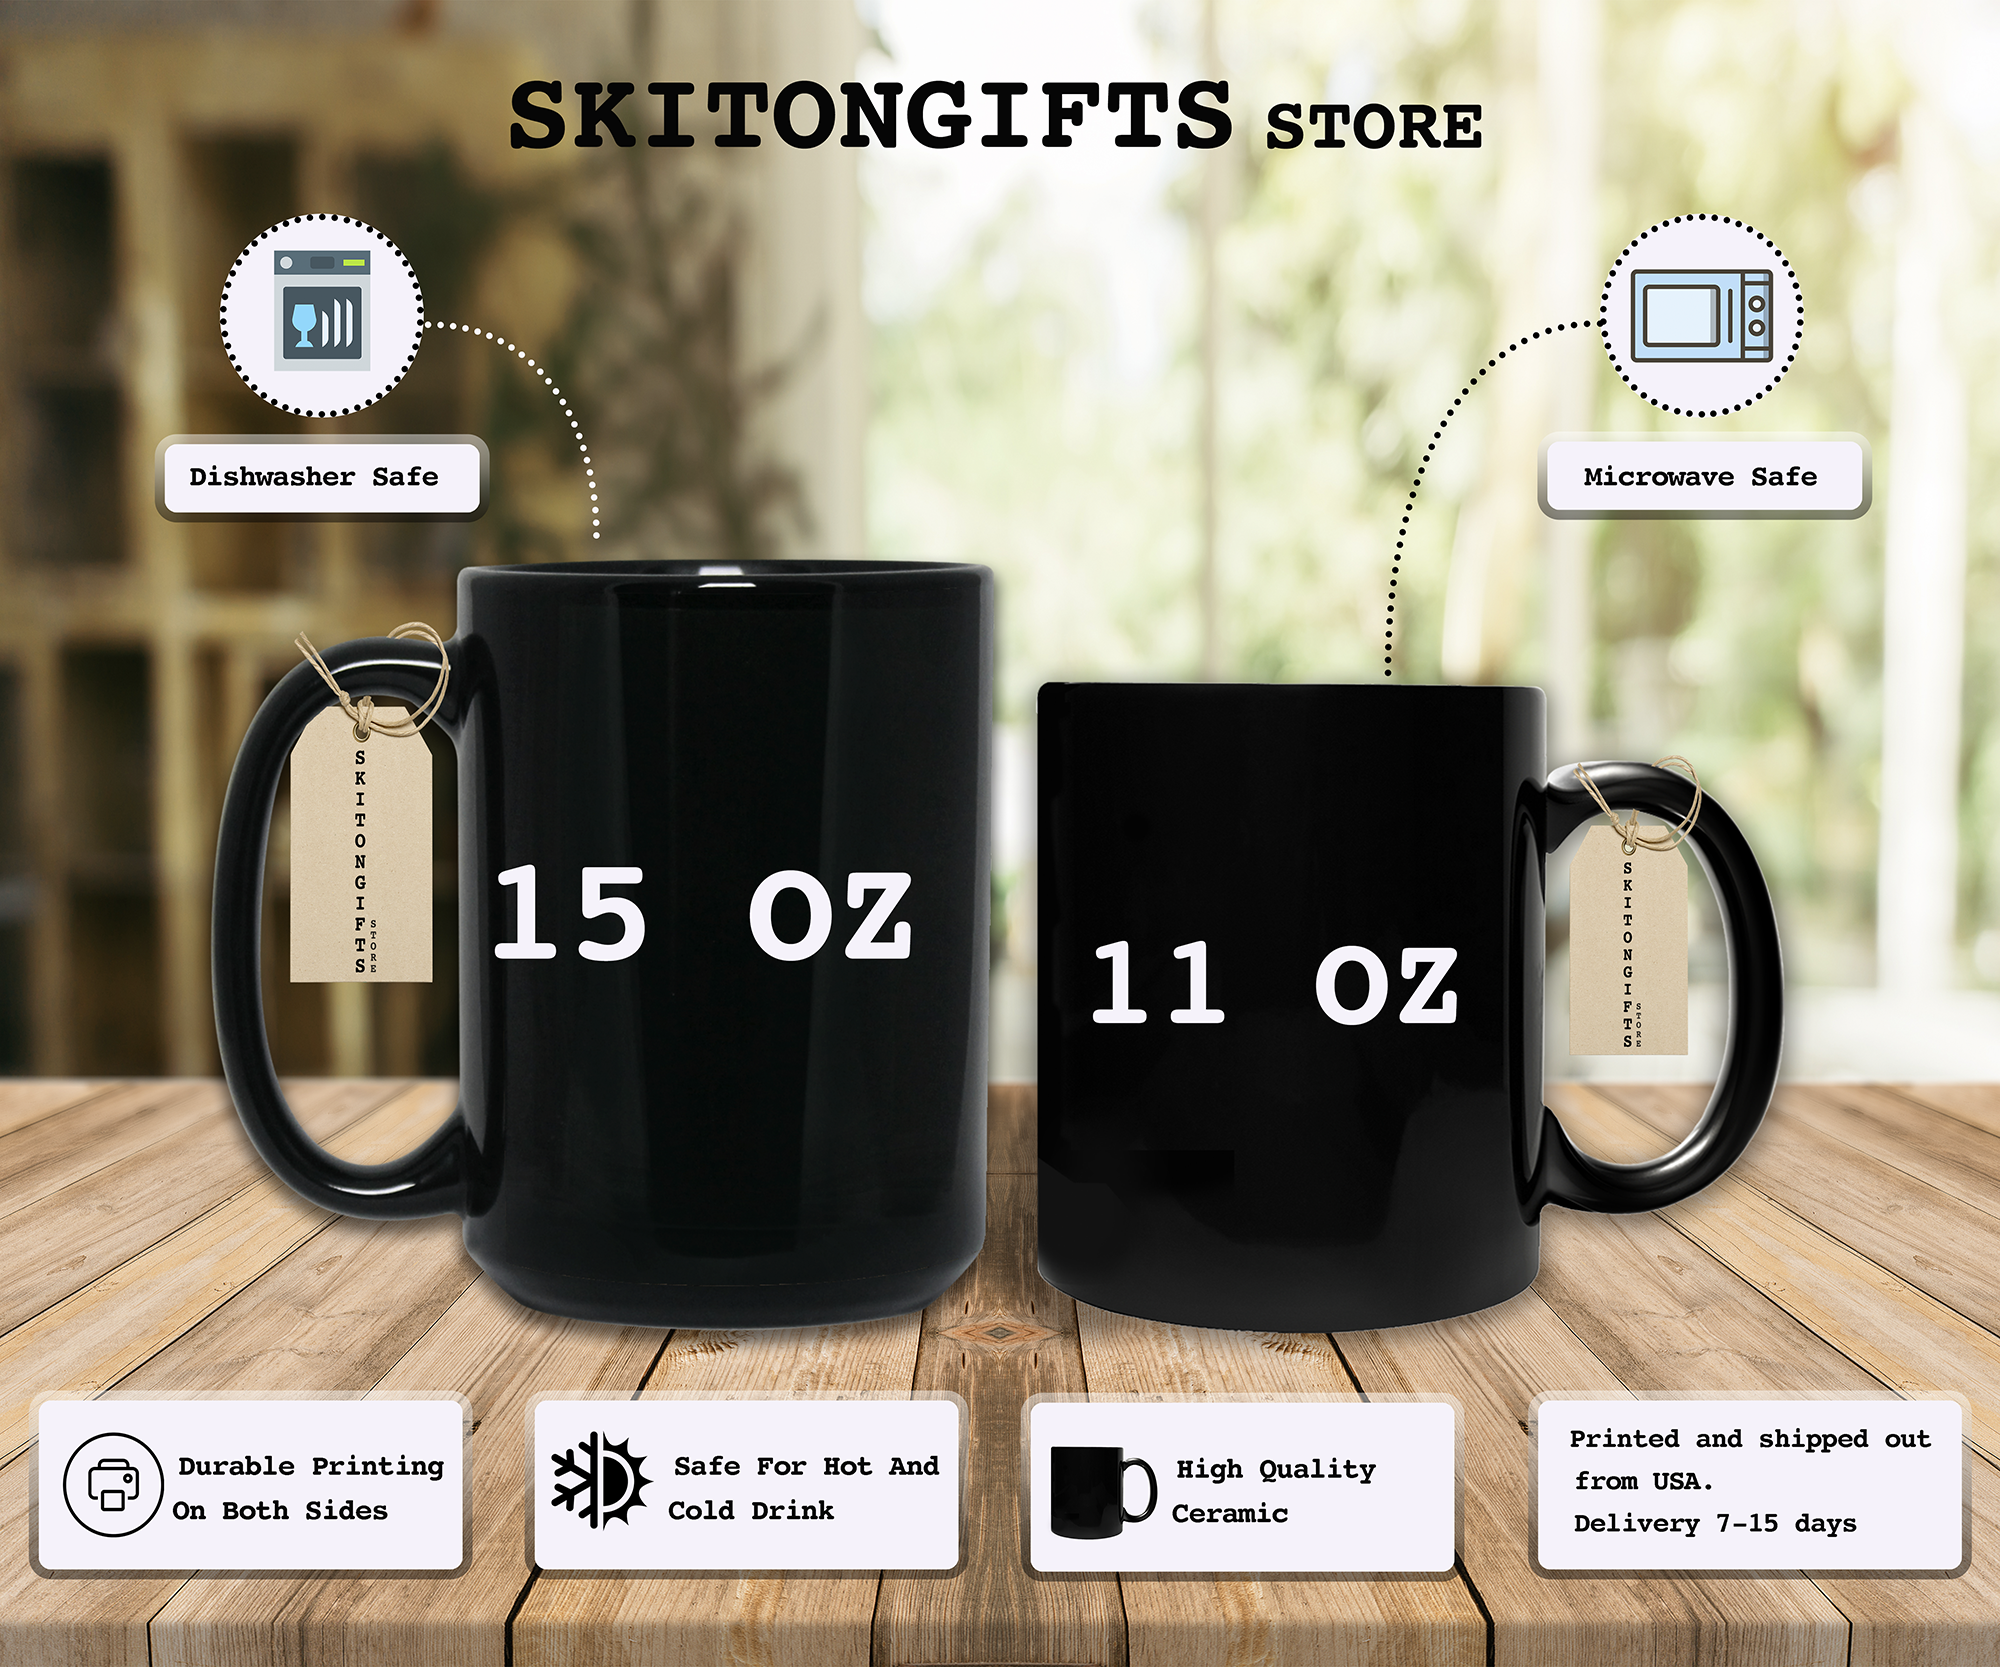 Skitongifts Funny Ceramic Novelty Coffee Mug You're The Luckiest Mother In The World. I Would Love To Have Me As A Daughter Mothers Day Gifts Ideas